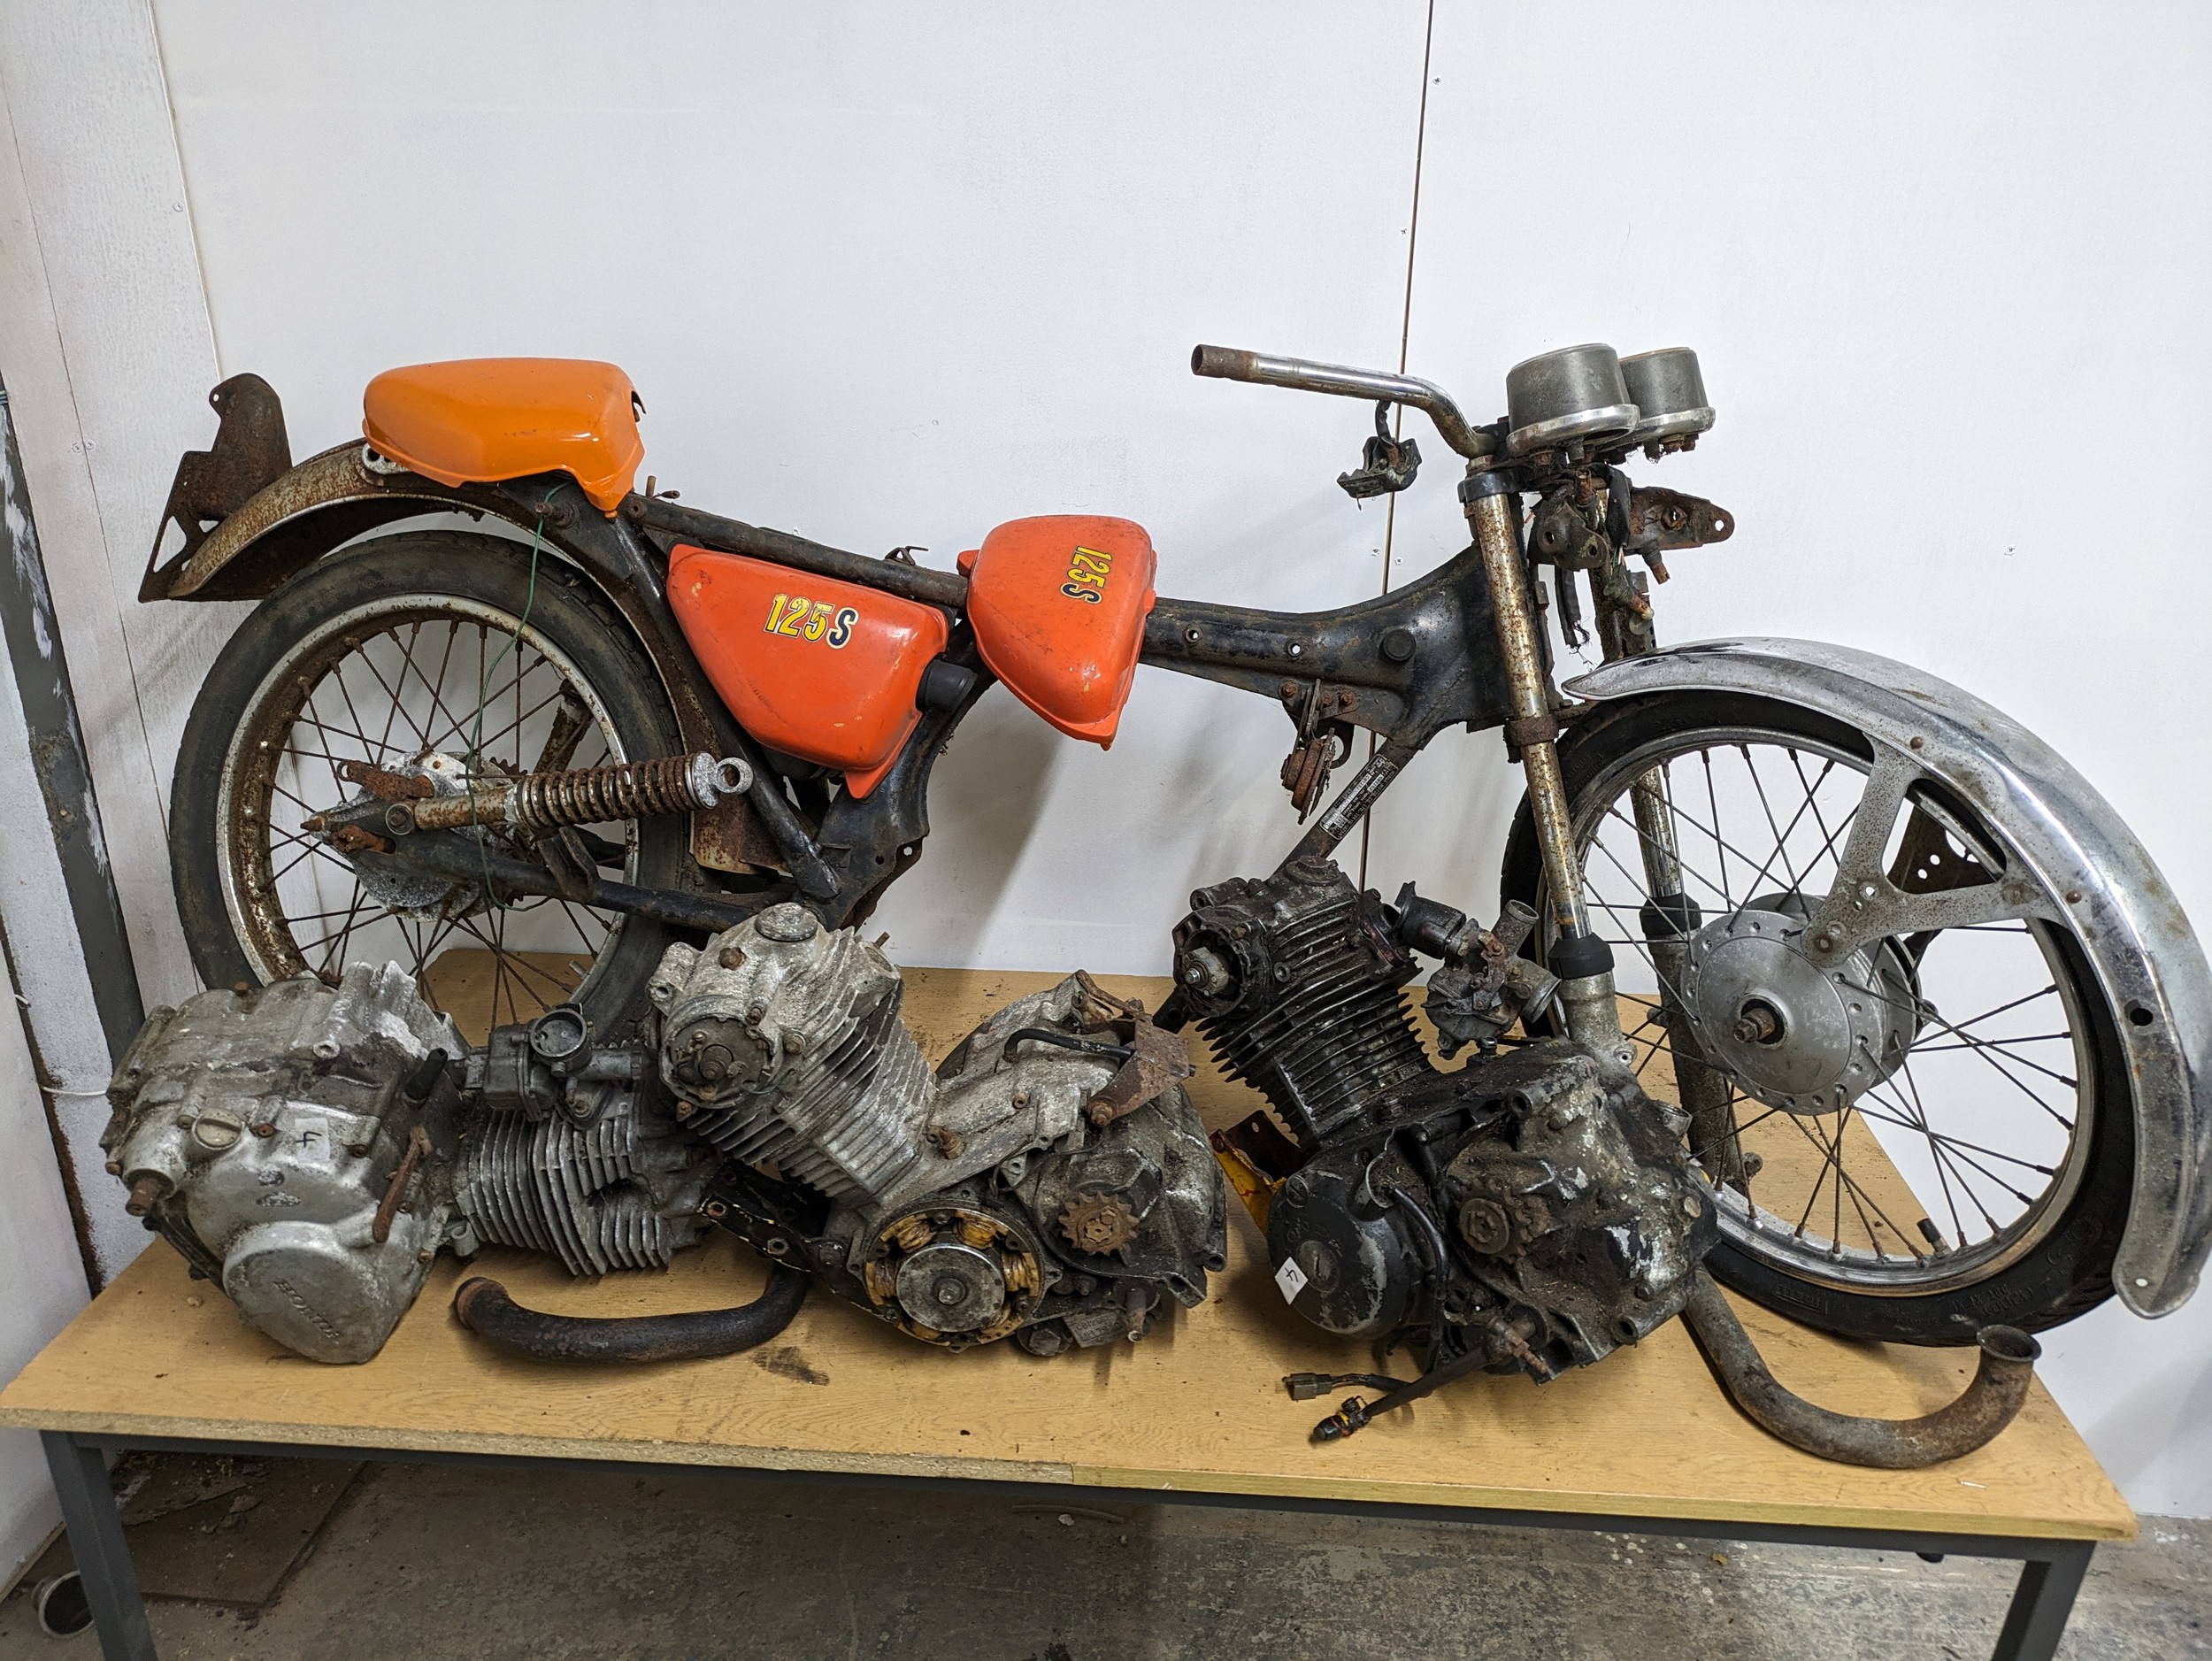 Honda CB125-S frame,3 engines and parts